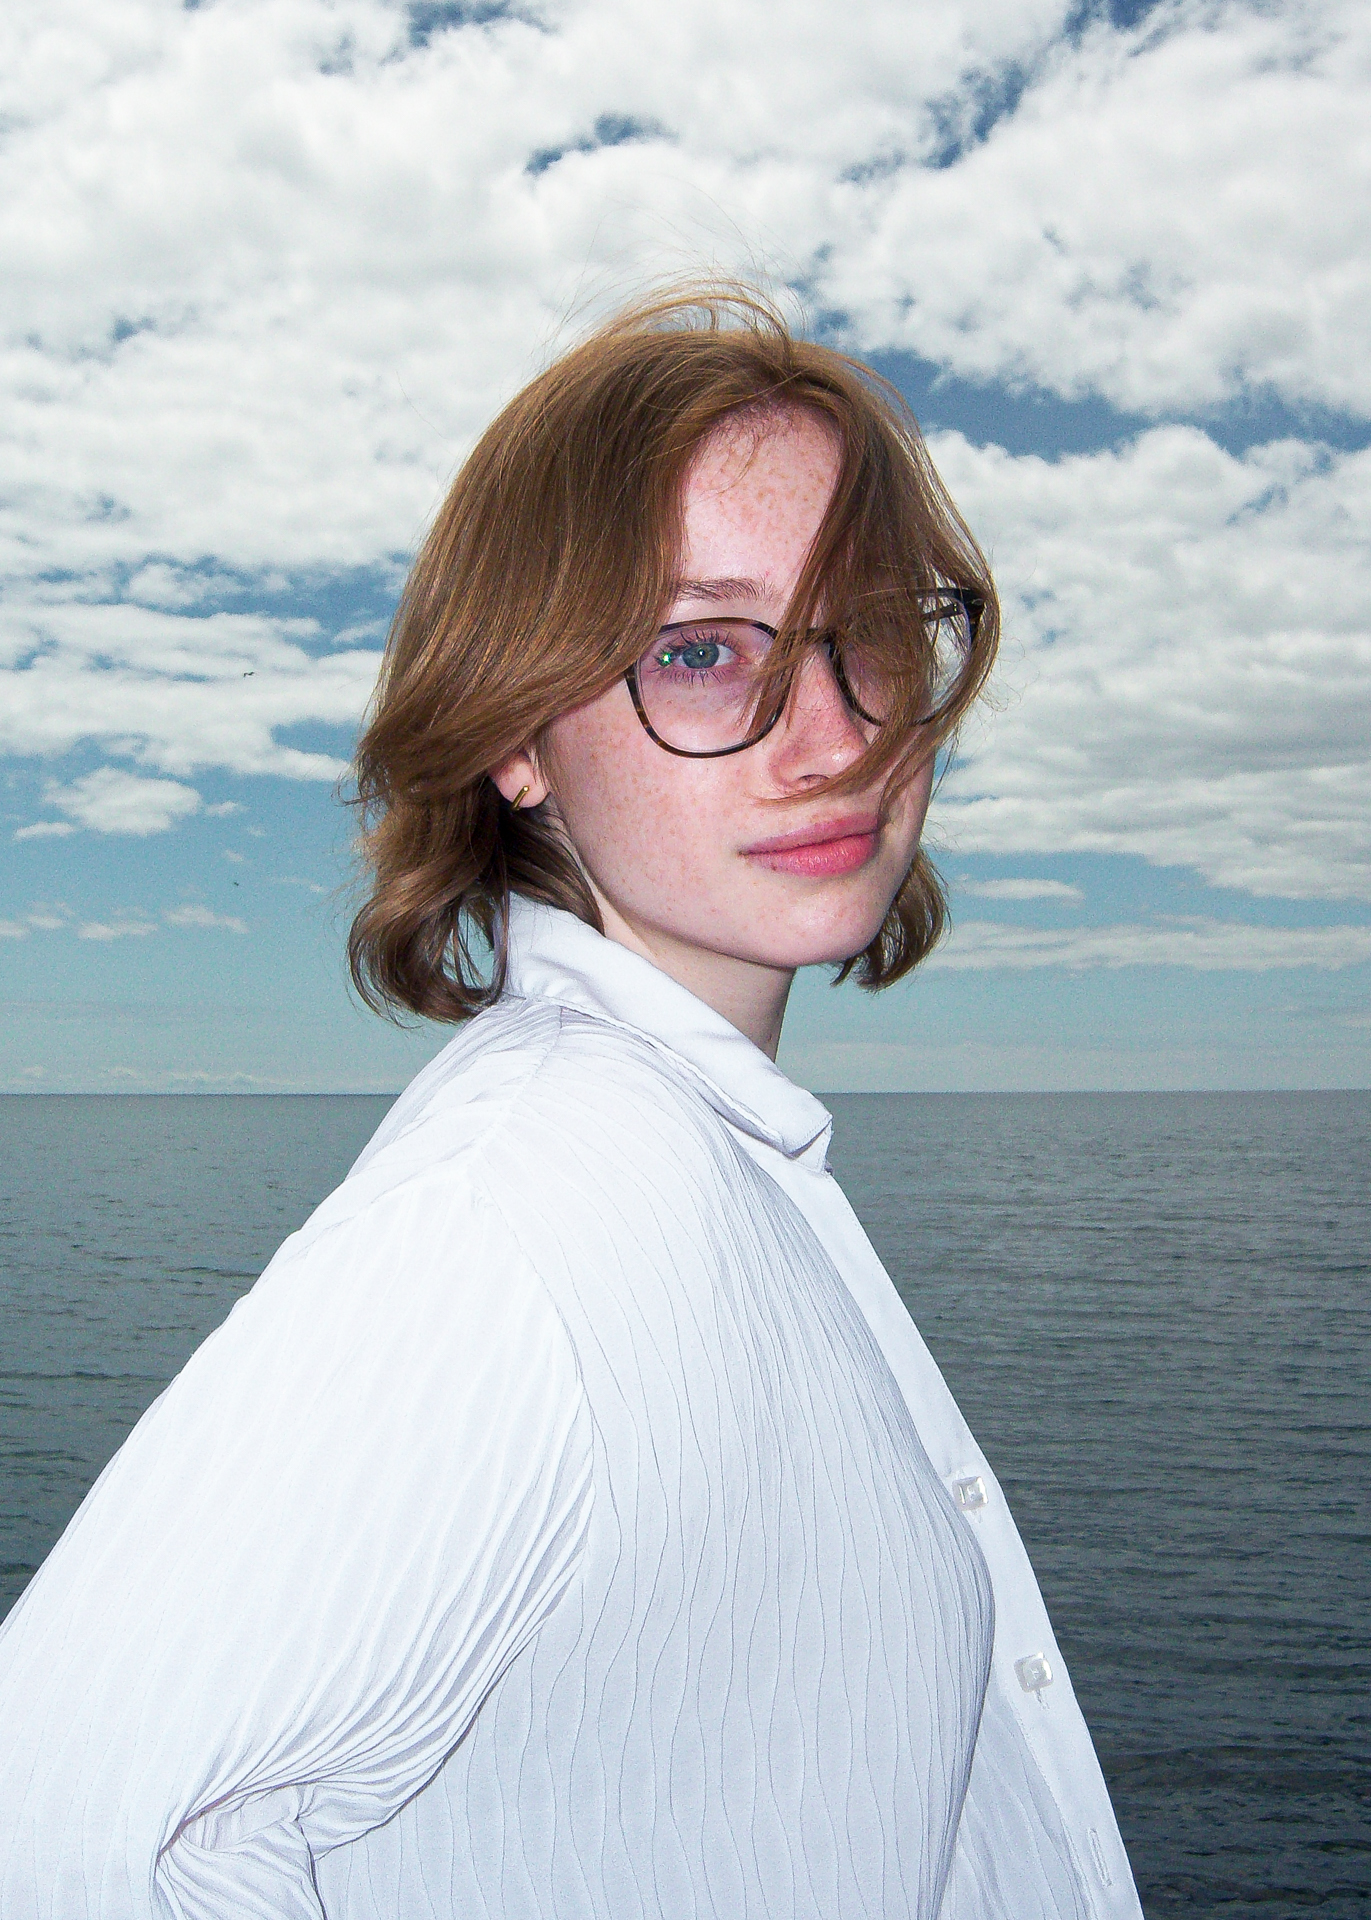 Flash Series The model, Regan, is standing on a beach wearing a white button up shirt and black rimmed glasses. She is looking straight forward as the wind blows hair into her face.